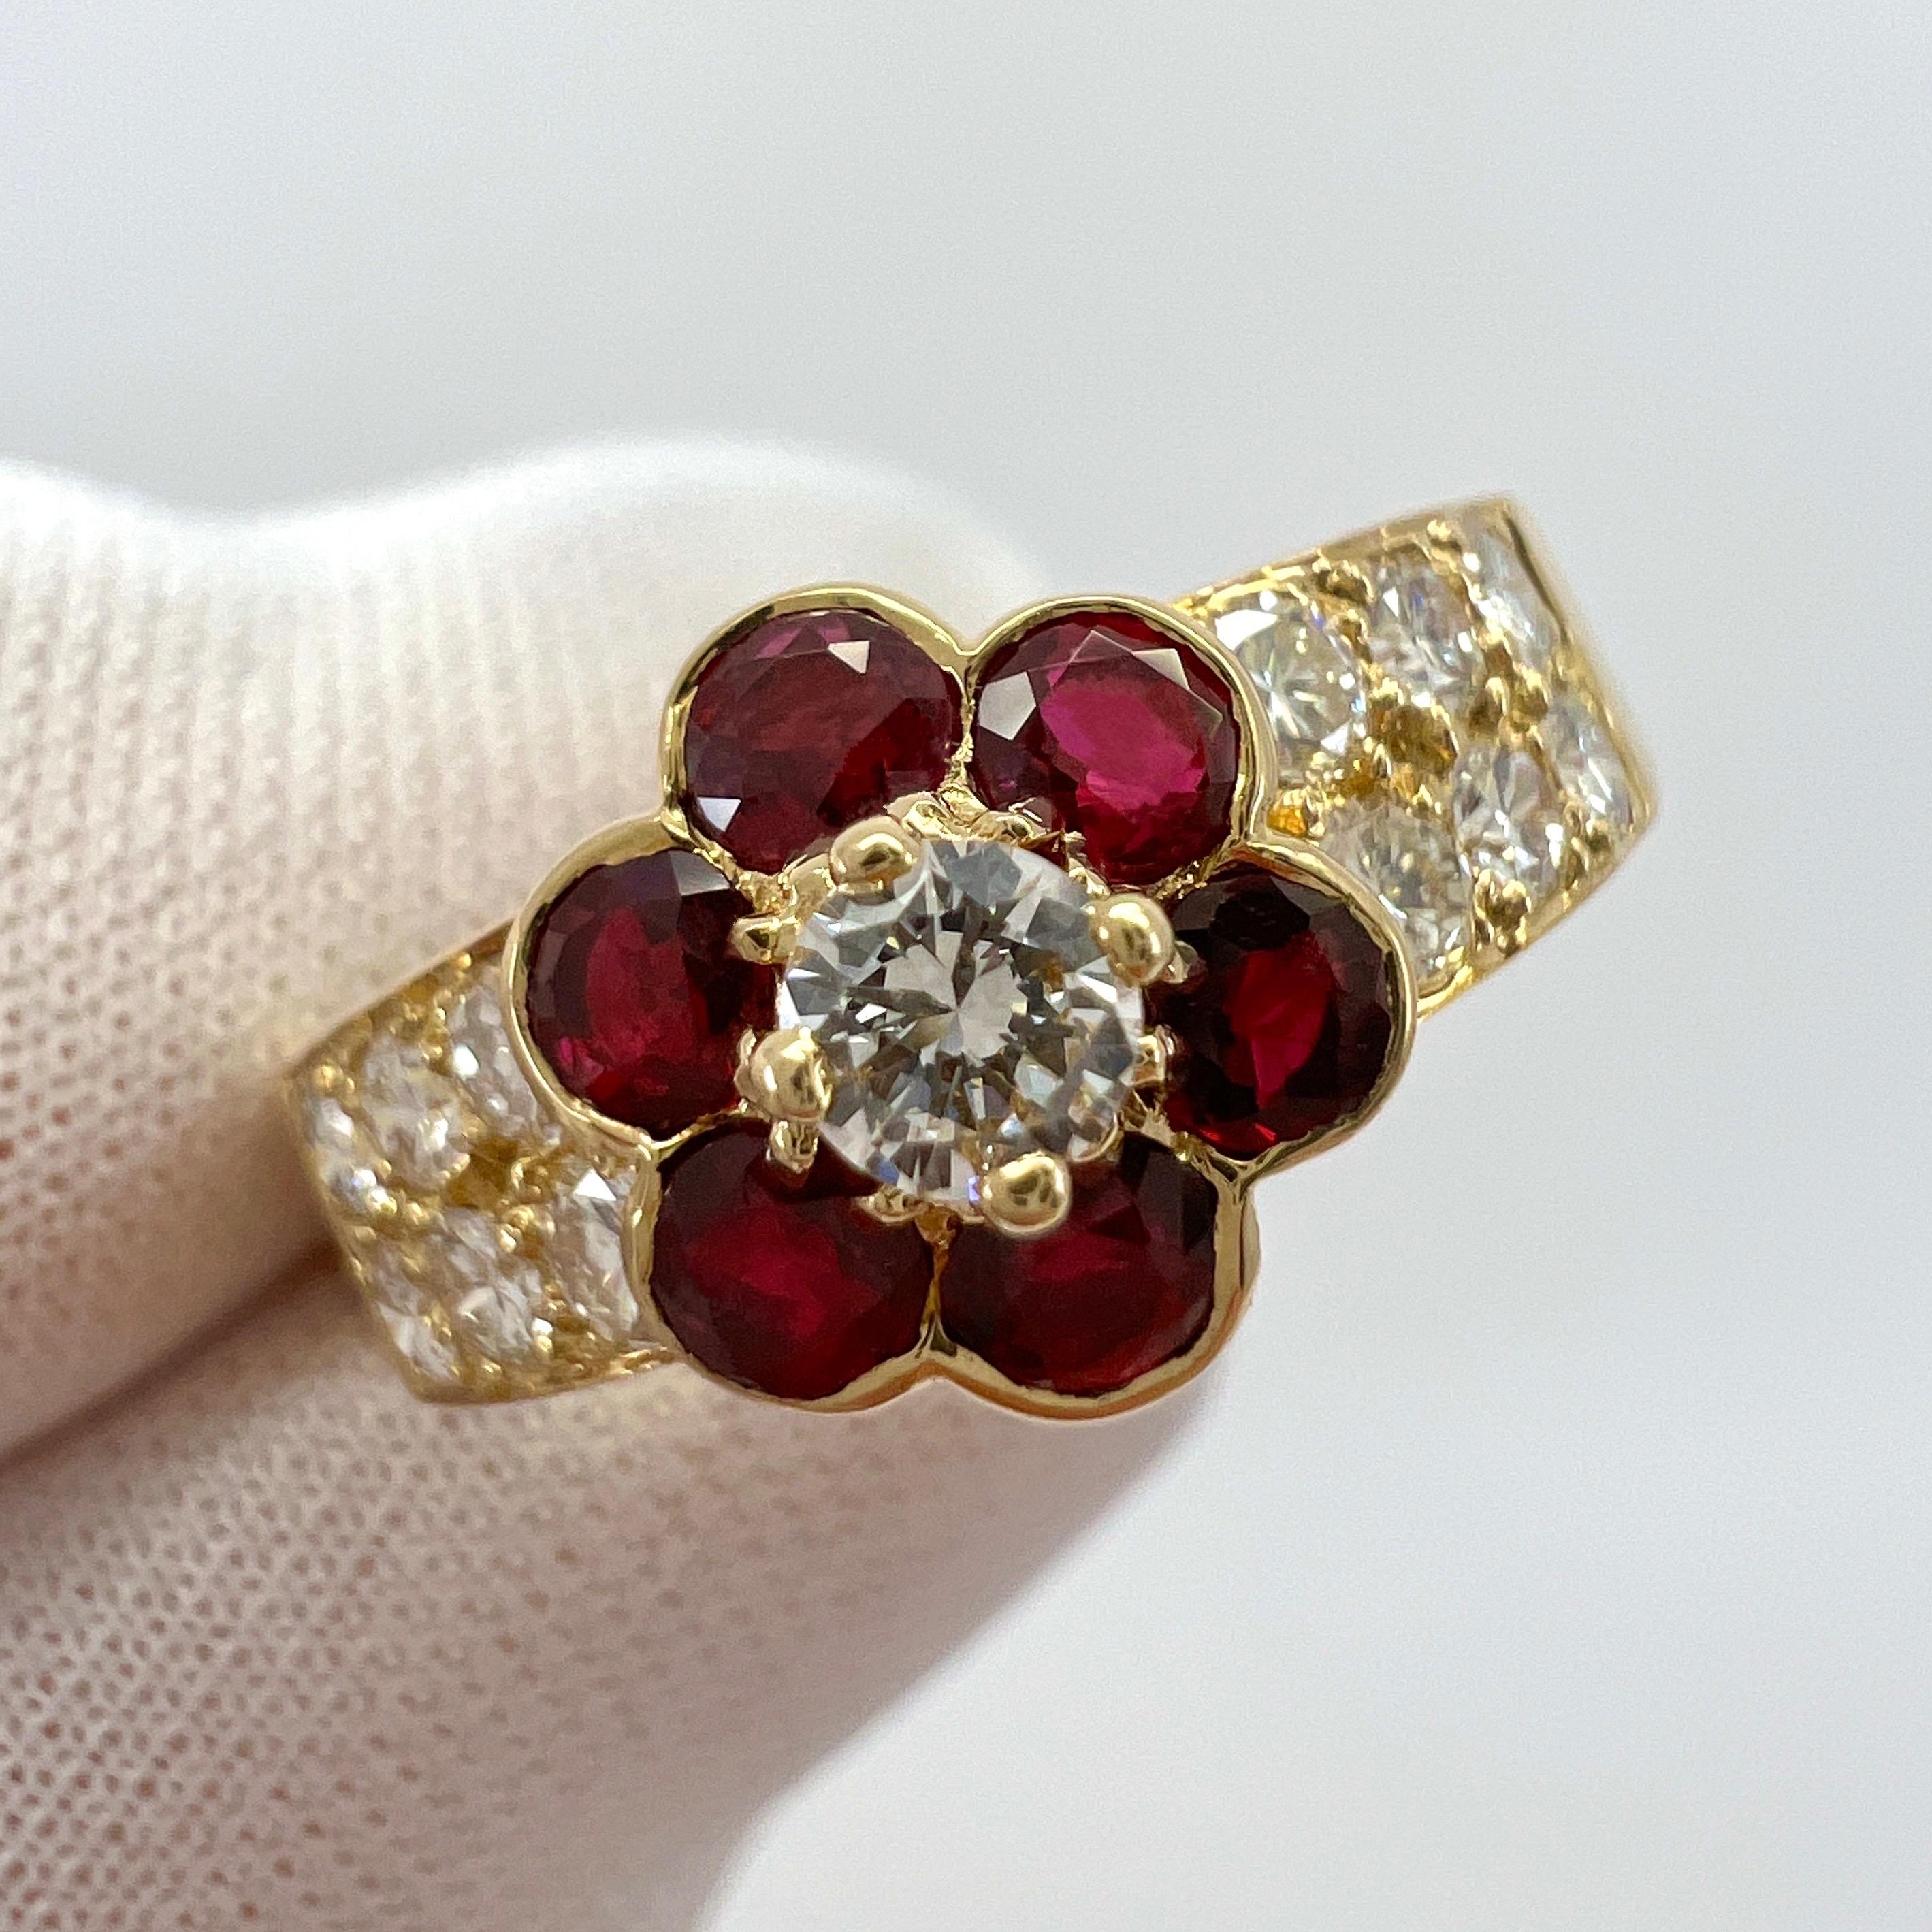 Fine Vintage Van Cleef & Arpels Ruby And Diamond 18k Yellow Gold Fleurette Flower Ring.

A stunning vintage ring with a unique floral design typical of Van Cleef & Arpels, set with beautiful natural round cut red rubies and diamonds in a classic